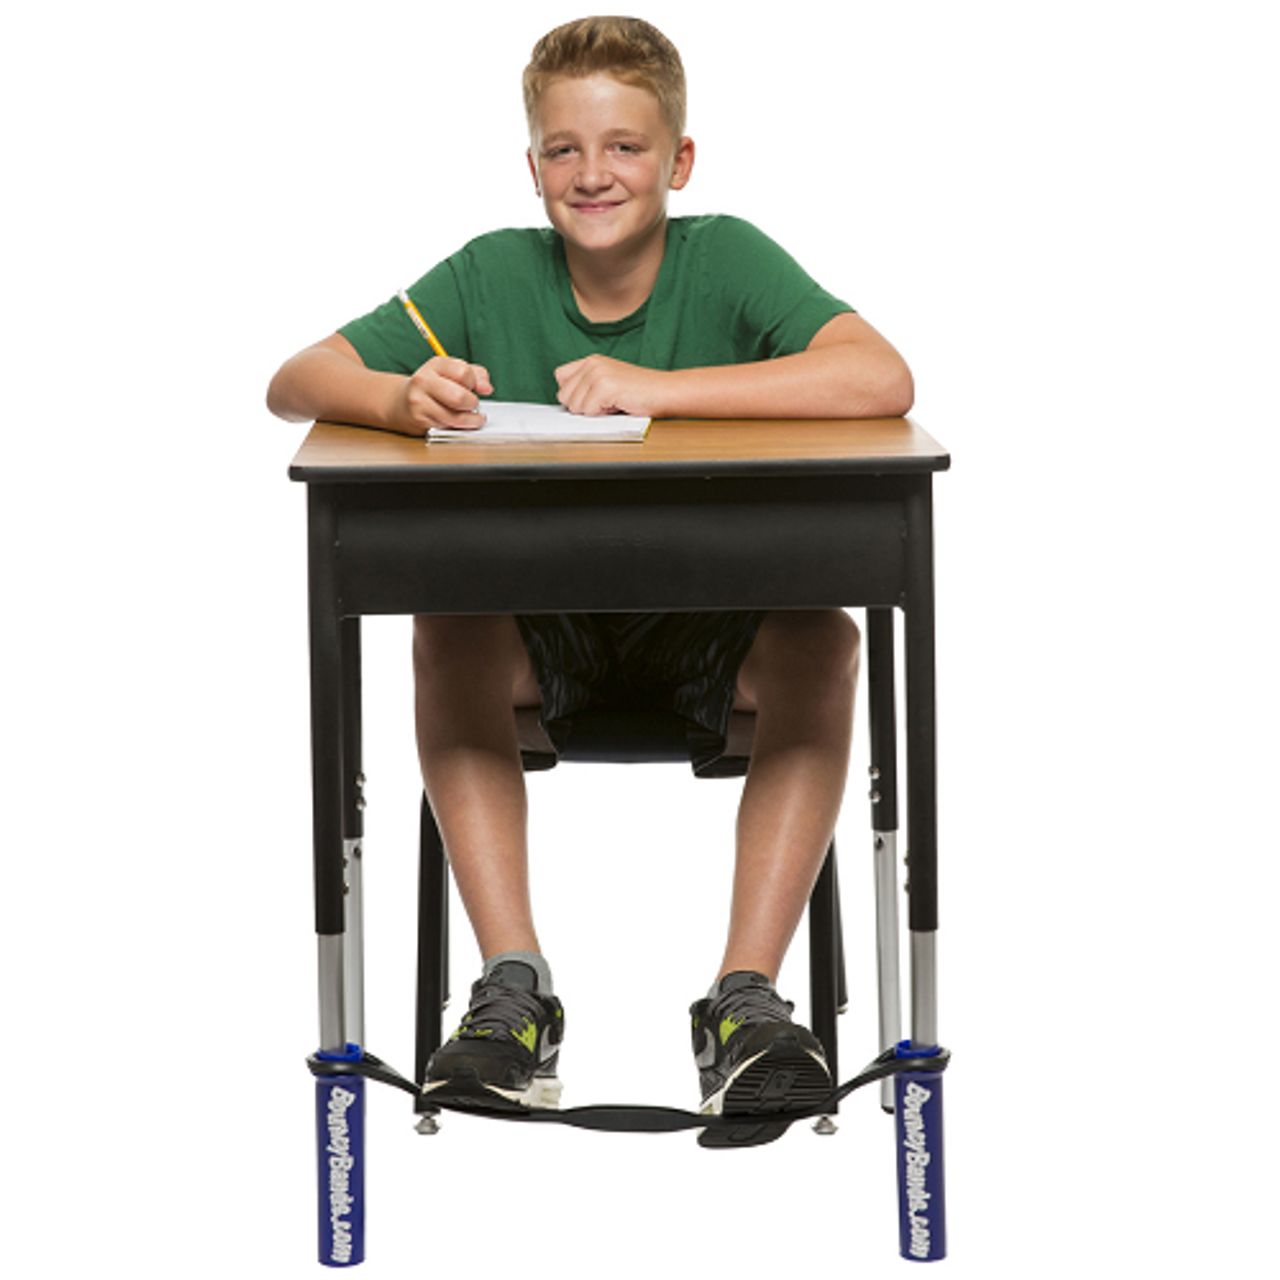 Bouncy Bands for Chairs - Helps Students Focus